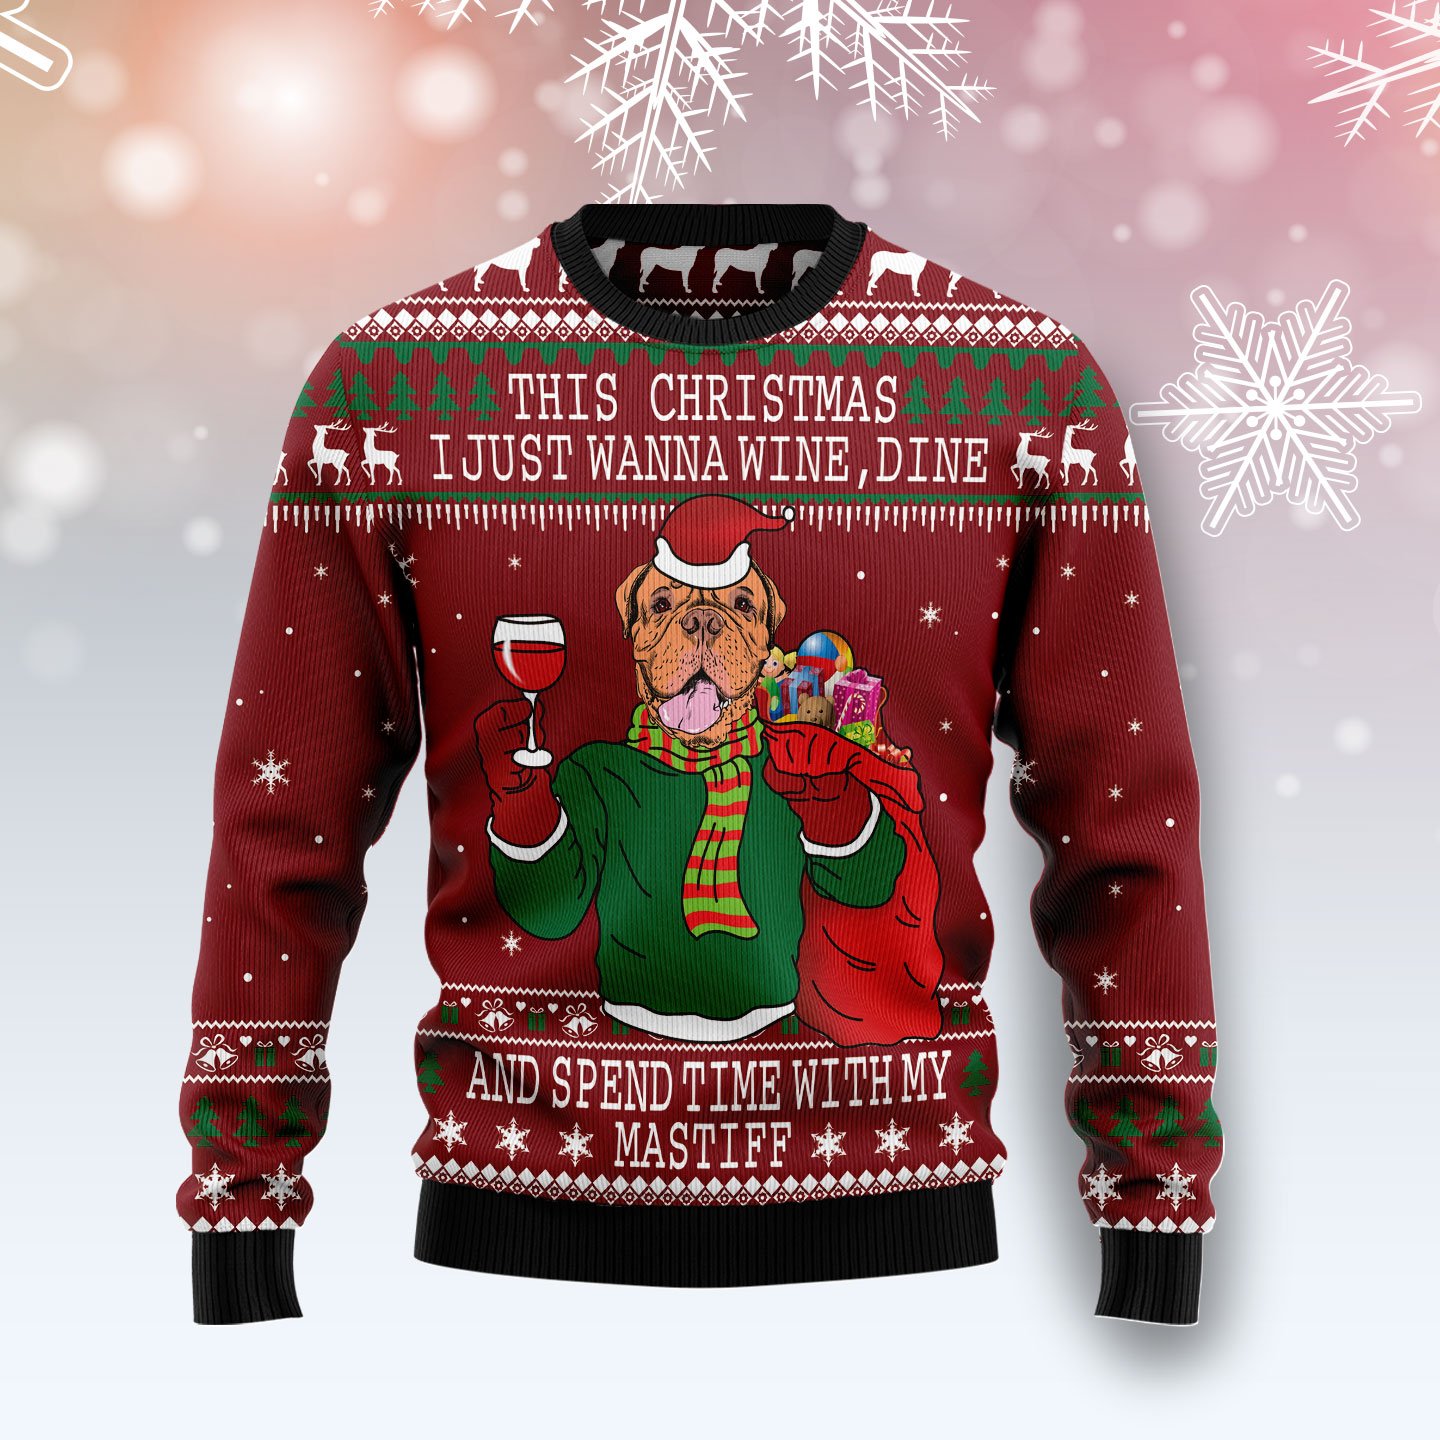 Spend Time With My Mastiff T89023 Ugly Christmas Sweater